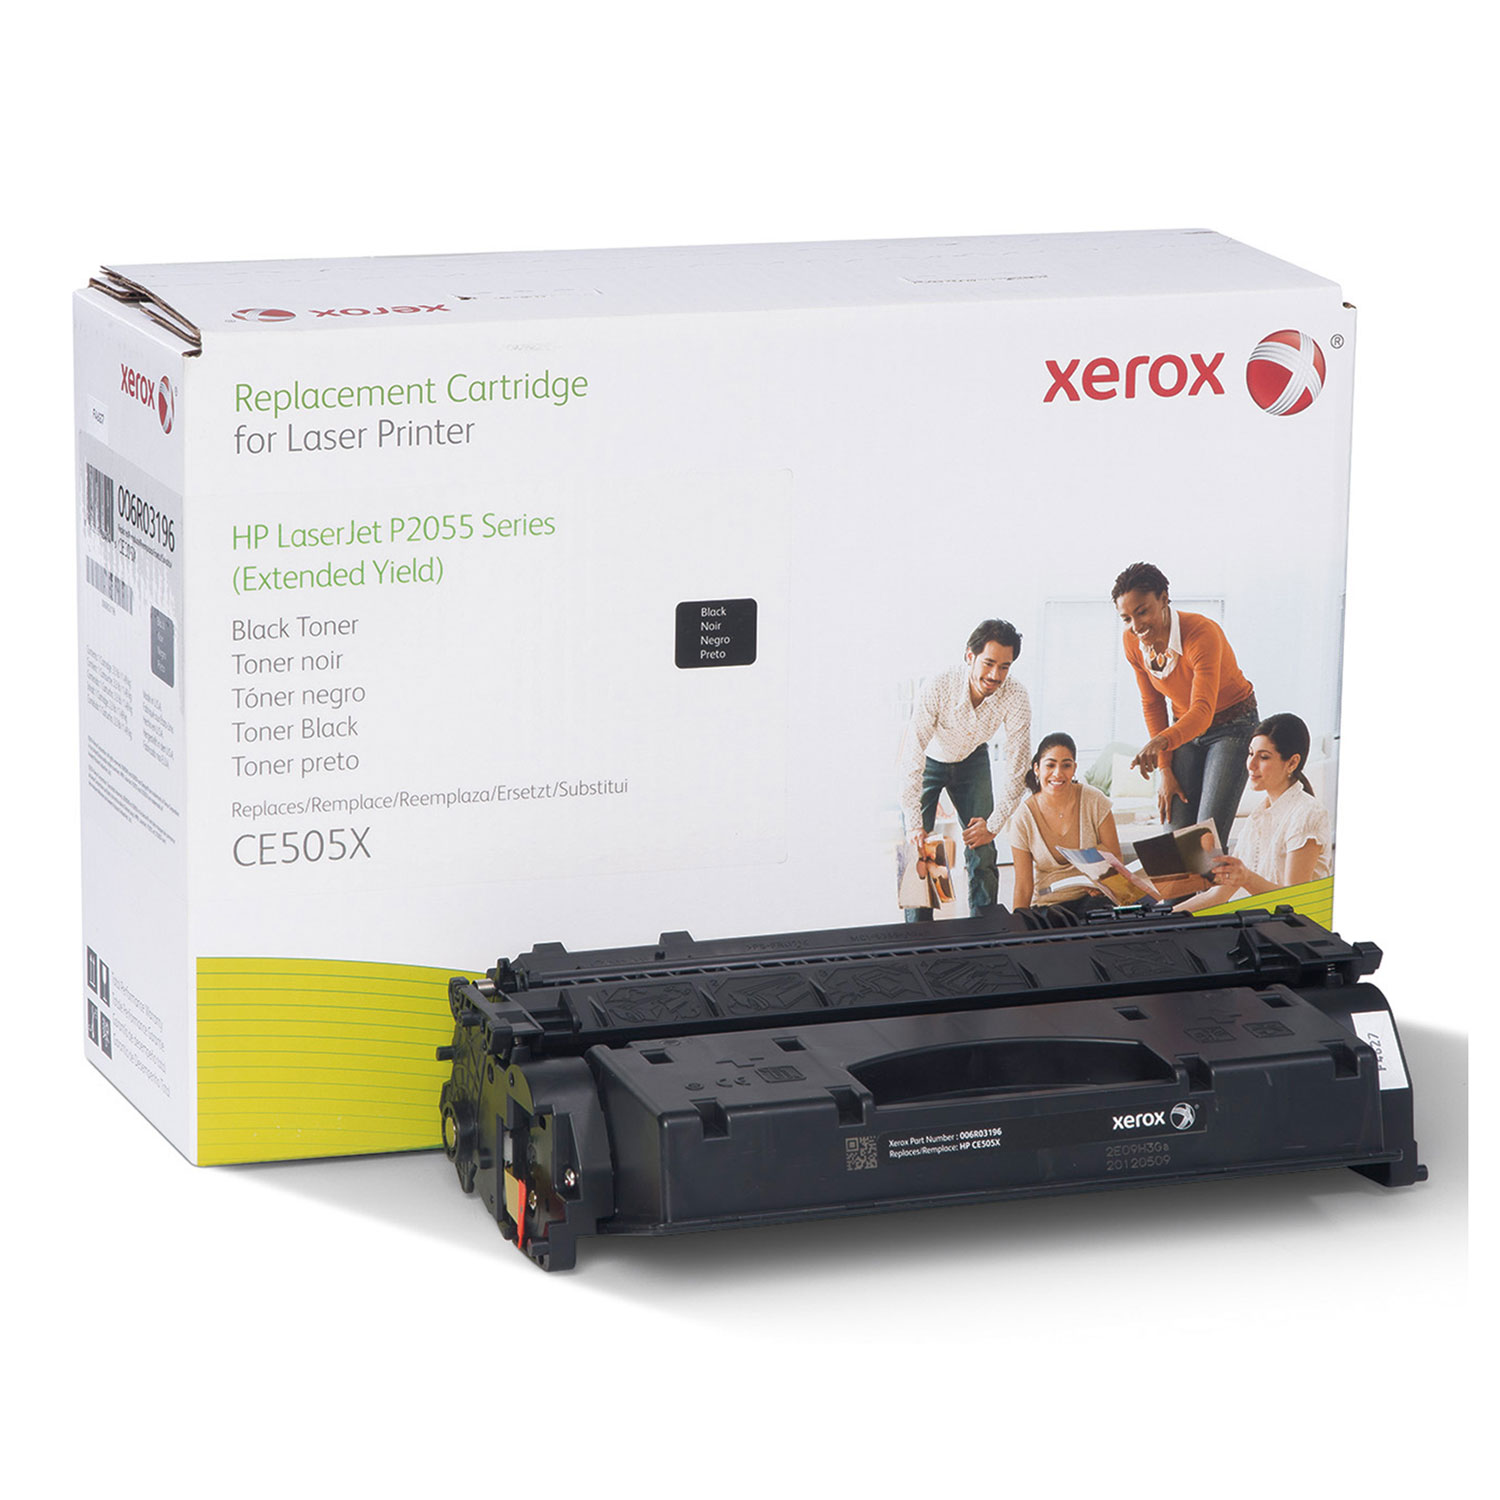  Xerox 006R03196 006R03196 Replacement Extended-Yield Toner for CE505X (05X), Black (XER006R03196) 